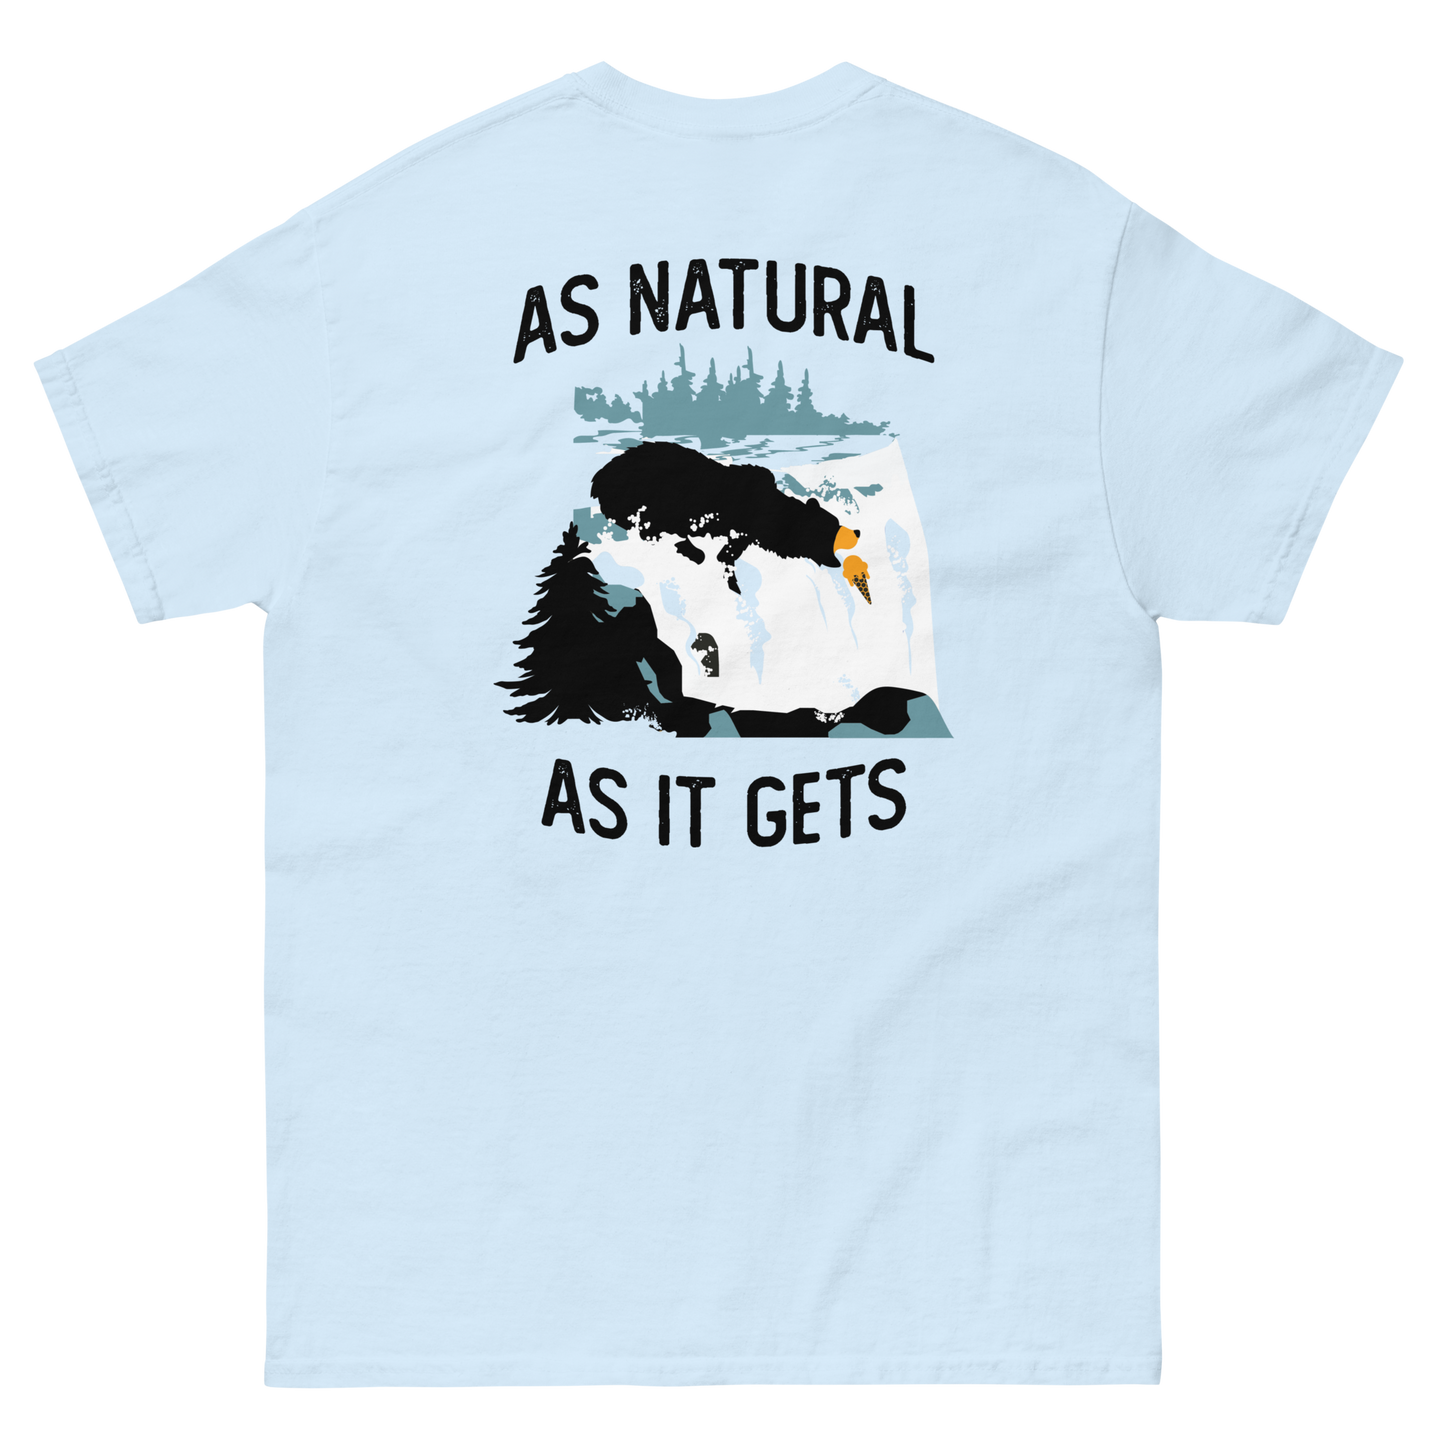 As Natural as it Gets Tee